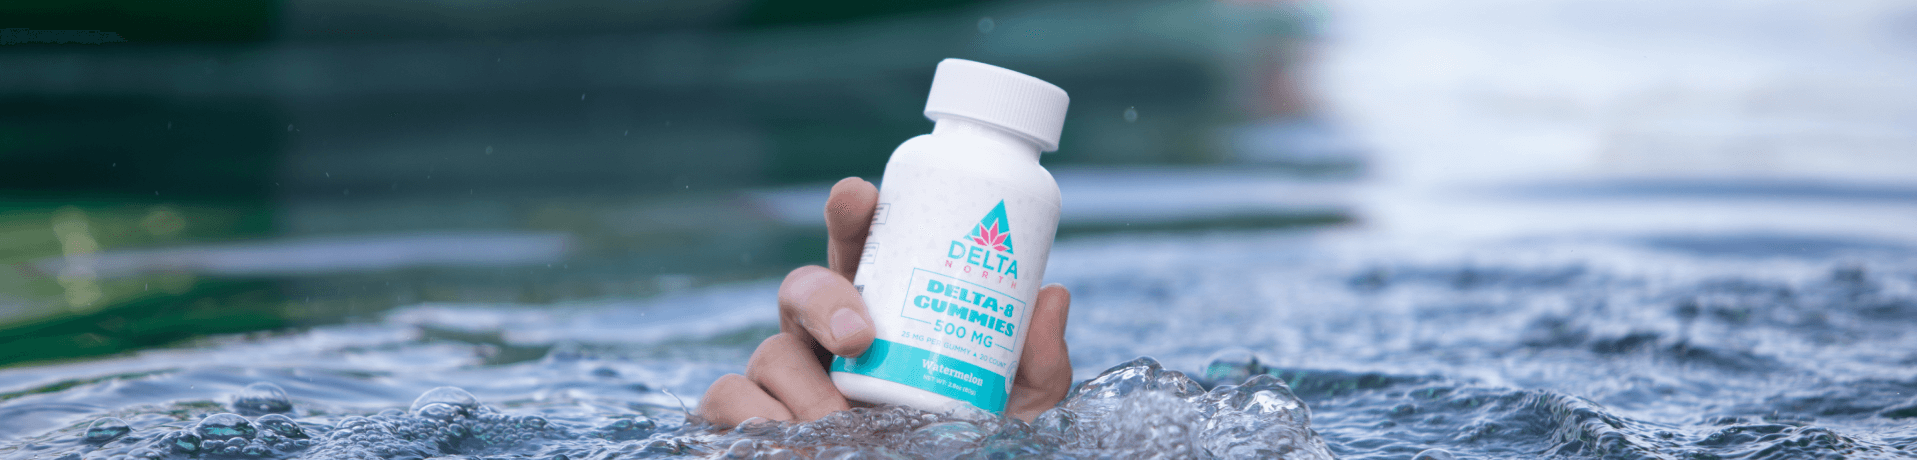 delta 8 gummies coming out of water